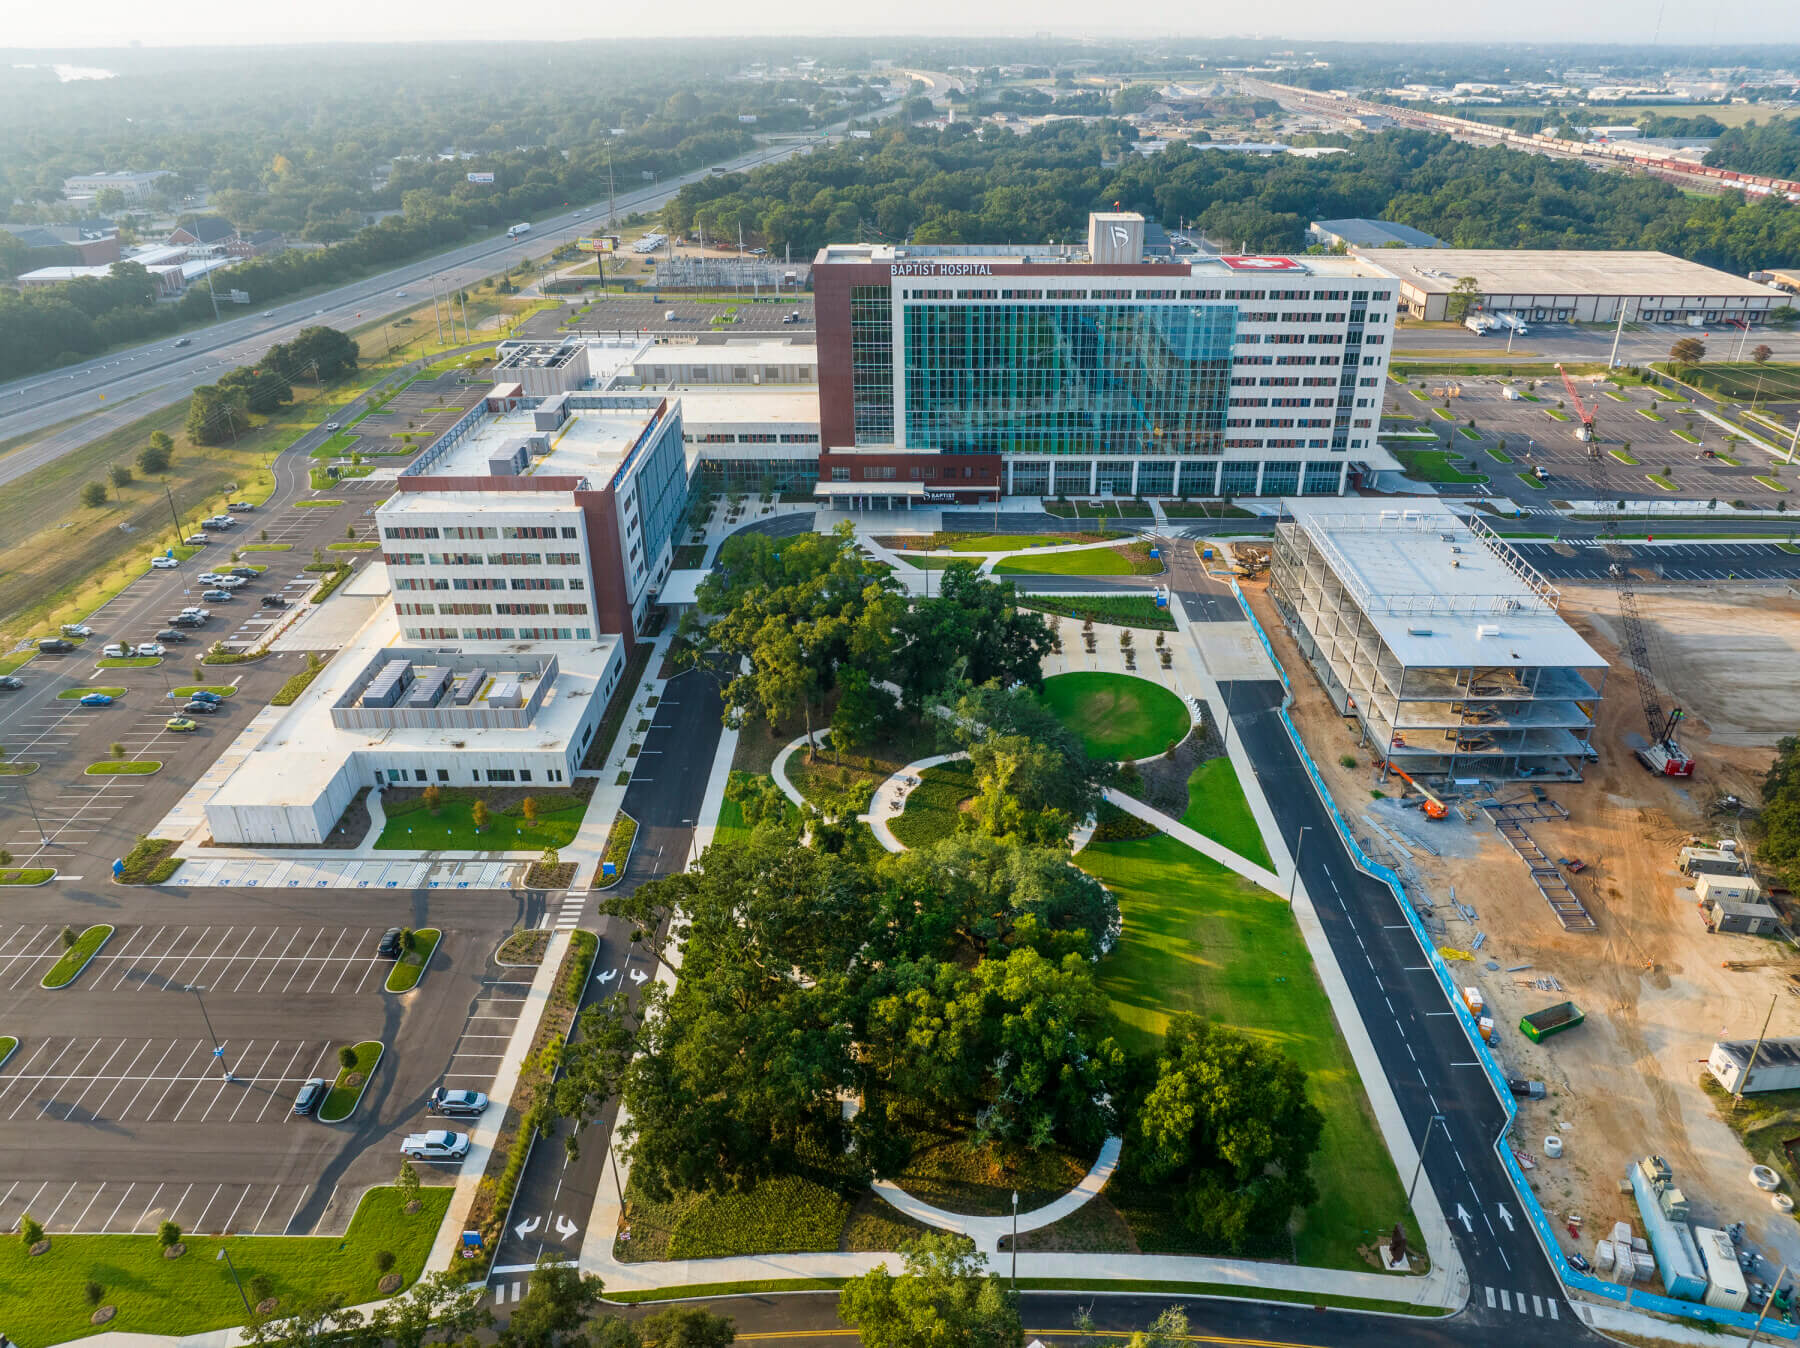 aerial view of entire hospital campus